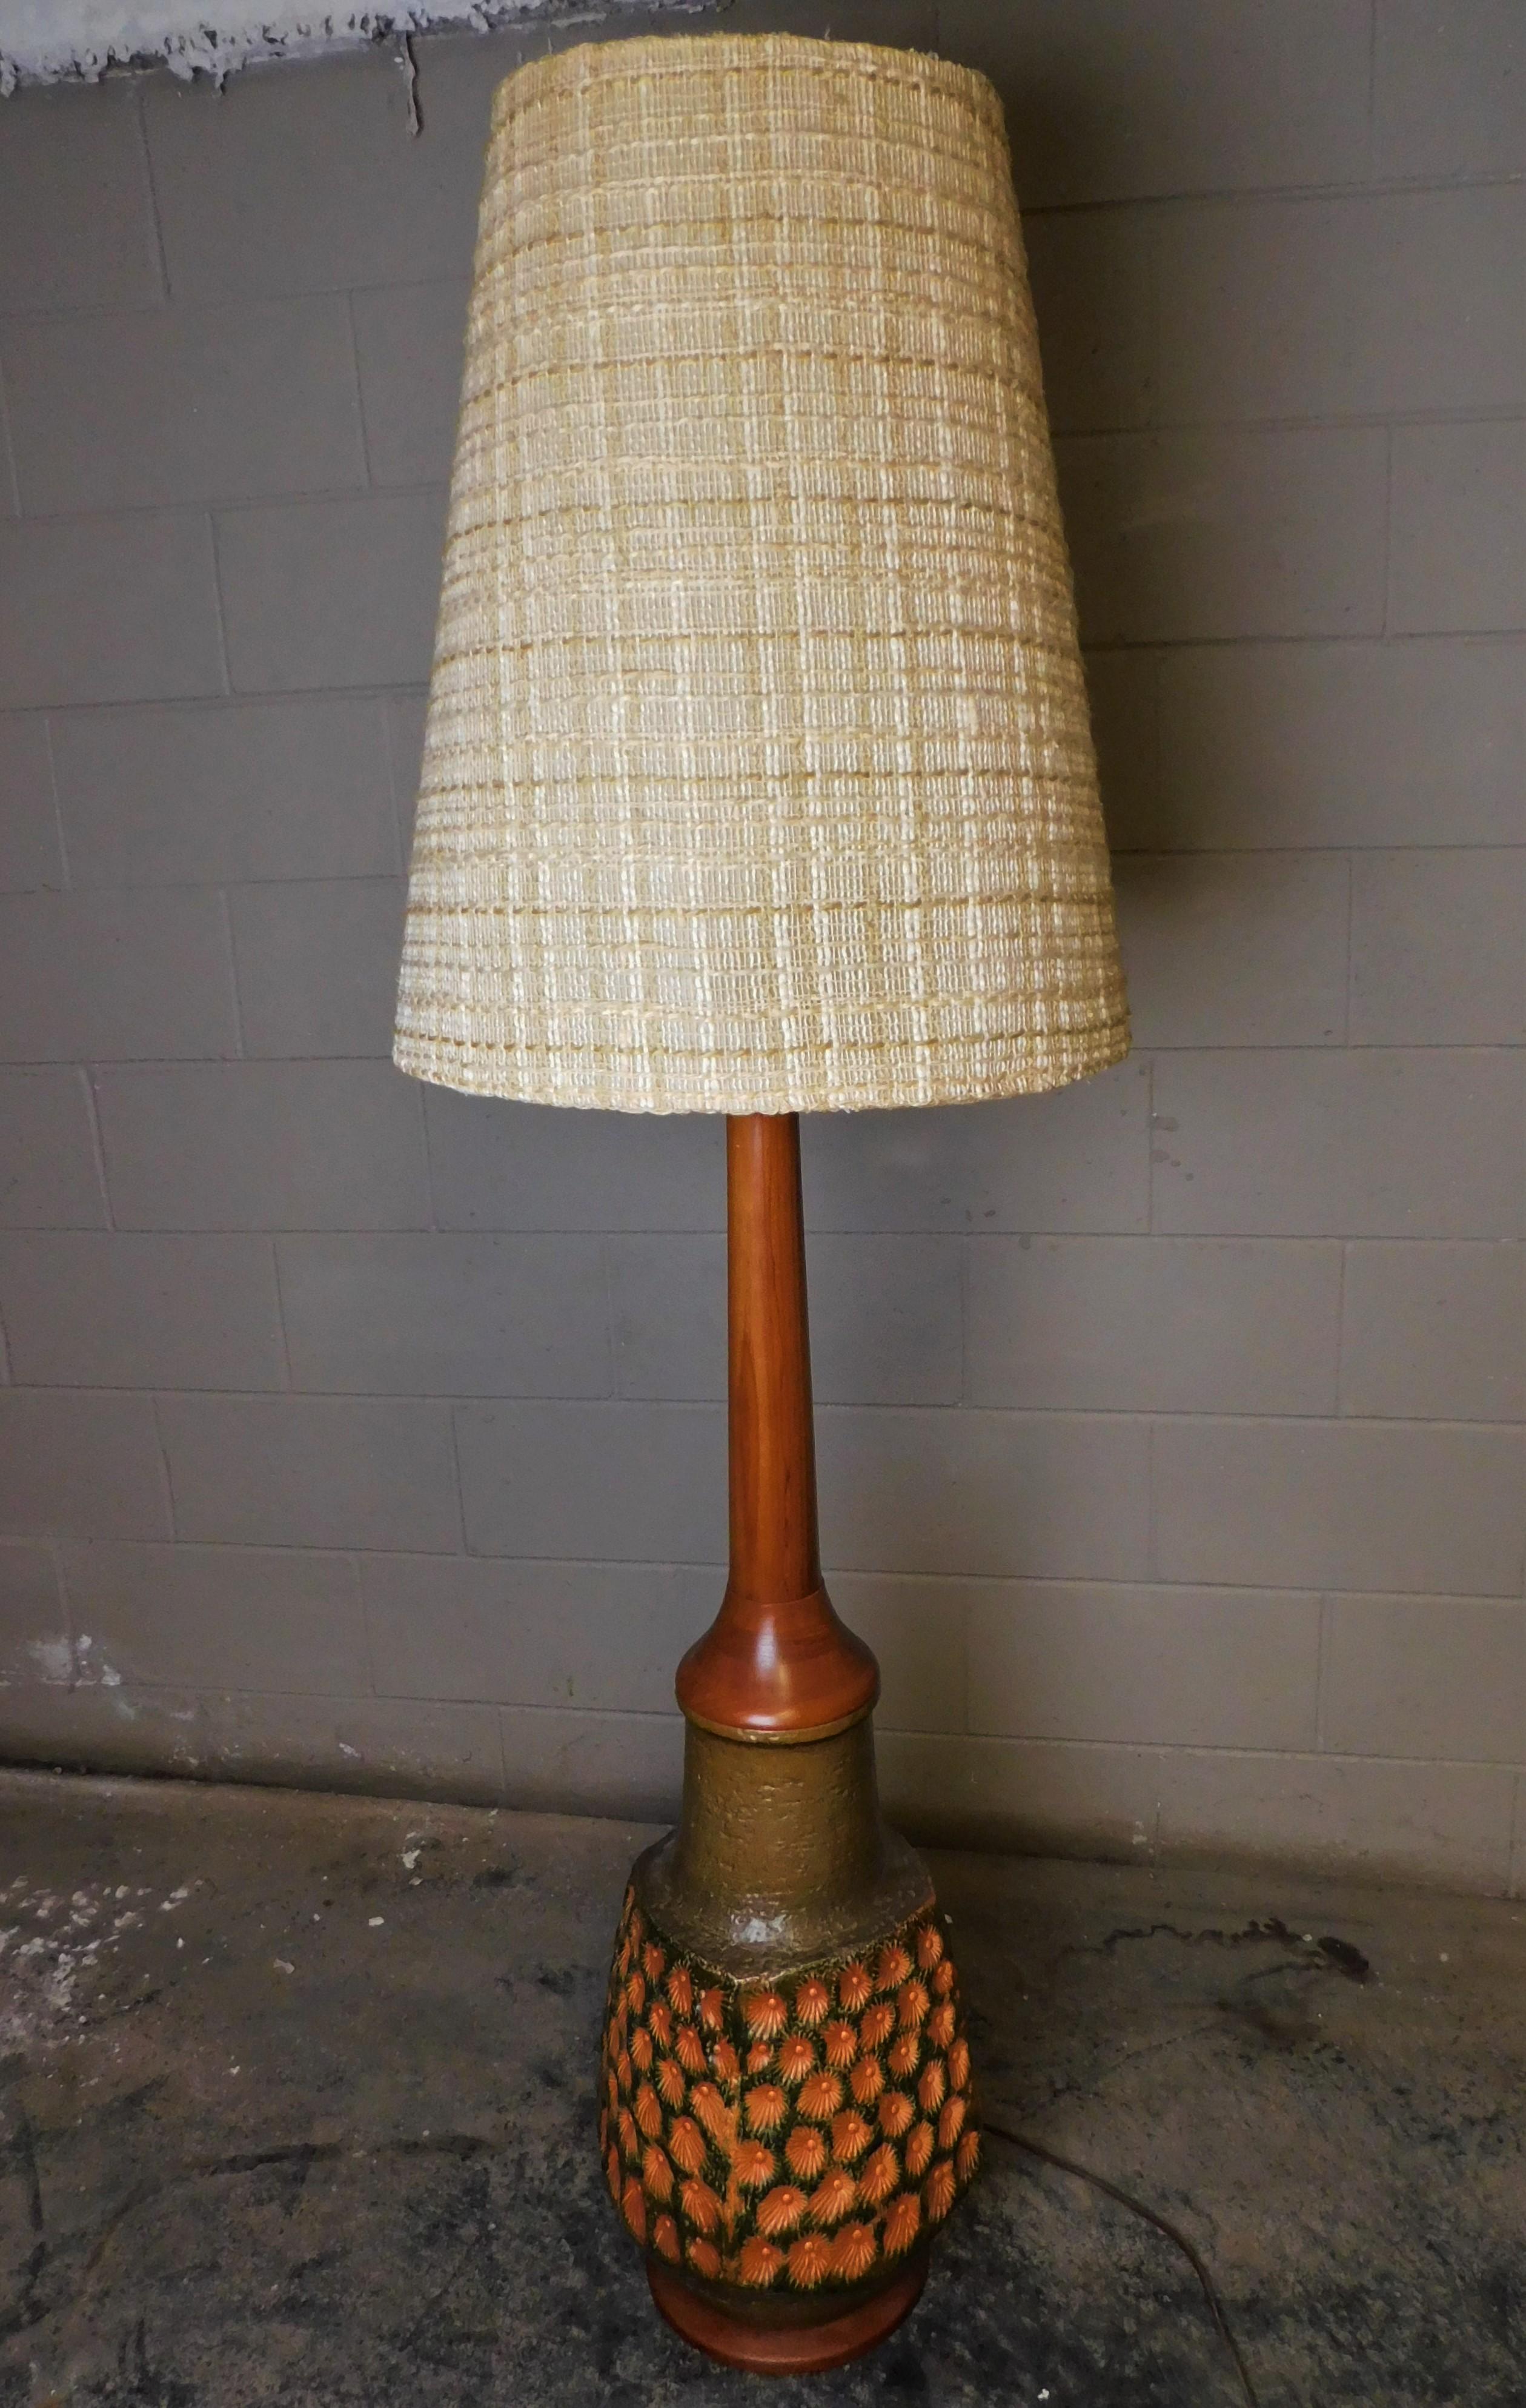 A fantastic rare Danish Mid-Century Modern/Scandinavian Modern teak and art pottery/ceramic floor lamp with the original conical fabric shade. Comprised of a solid teak round base with an oversized glazed ceramic body. The pineapple shaped body has